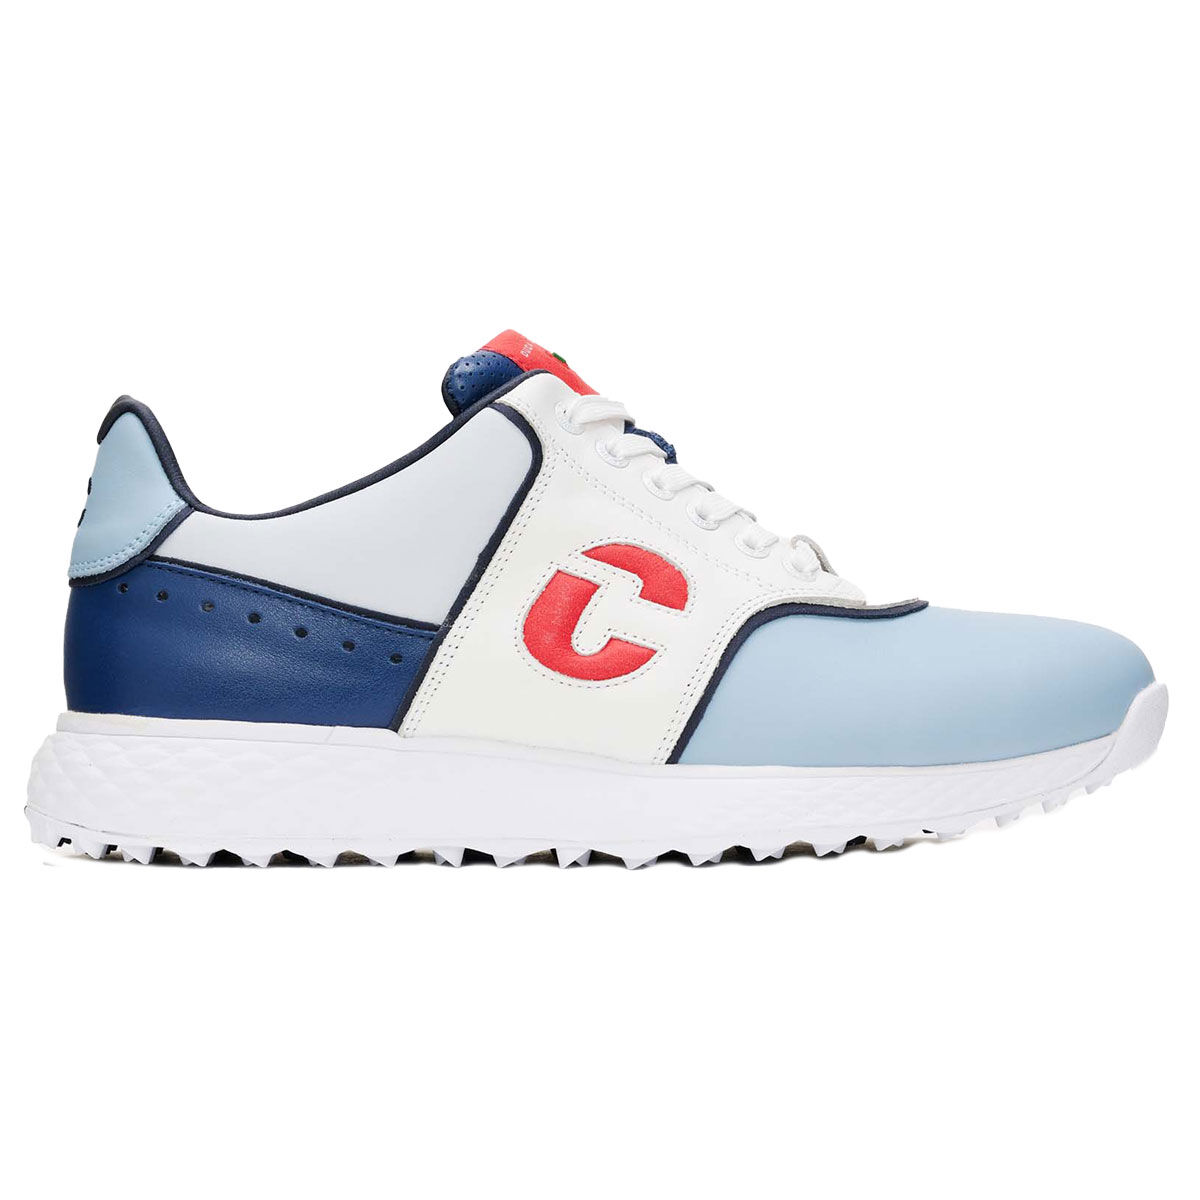 Duca Del Cosma Mens White, Blue and Red Positano Waterproof Spikeless Golf Shoes, Size: 7 | American Golf von Duca Del Cosma